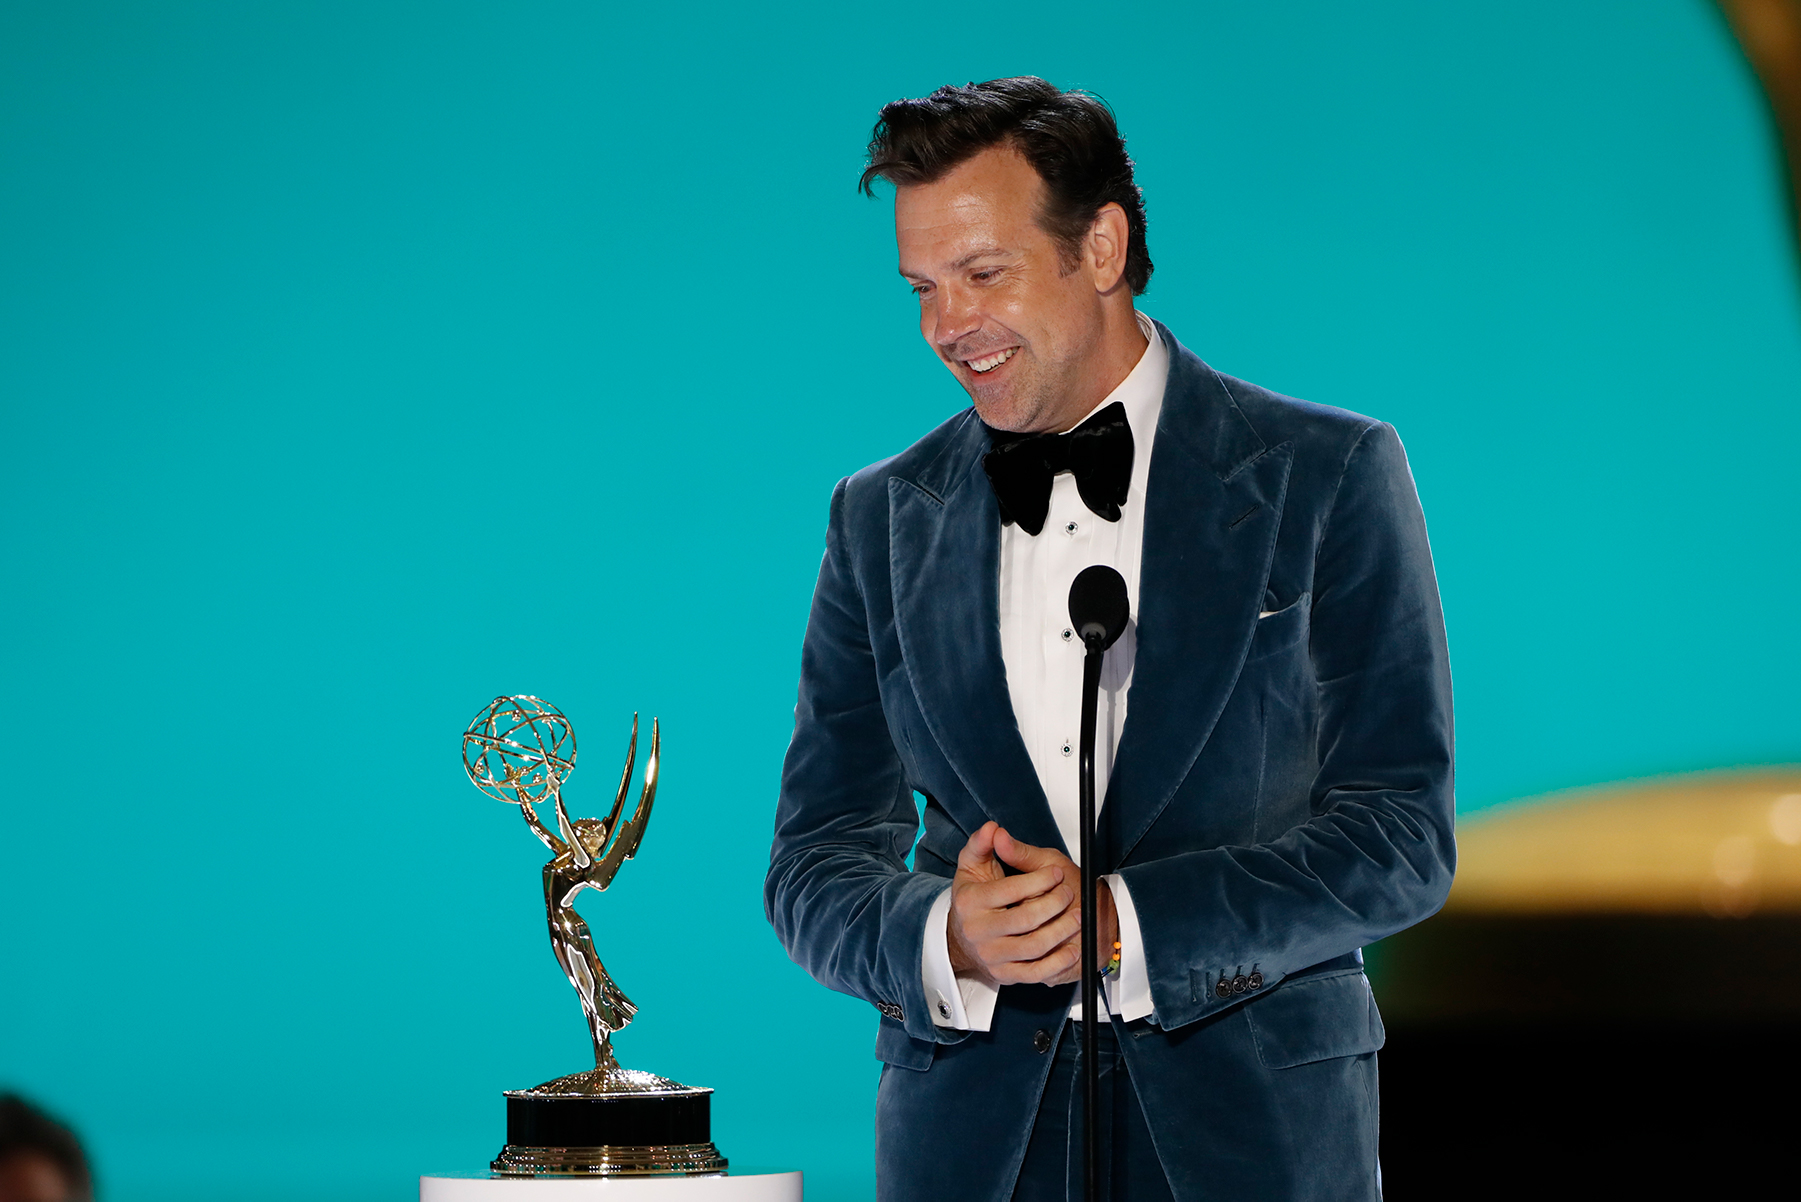 LOS ANGELES - SEPTEMBER 19: Jason Sudeikis from 'Ted Lasso' appears at the 73RD EMMY AWARDS, broadcast Sunday, Sept. 19 (8:00-11:00 PM, live ET/5:00-8:00 PM, live PT) on the CBS Television Network and available to stream live and on demand on Paramount+. -- (Photo by Cliff Lipson/CBS via Getty Images)